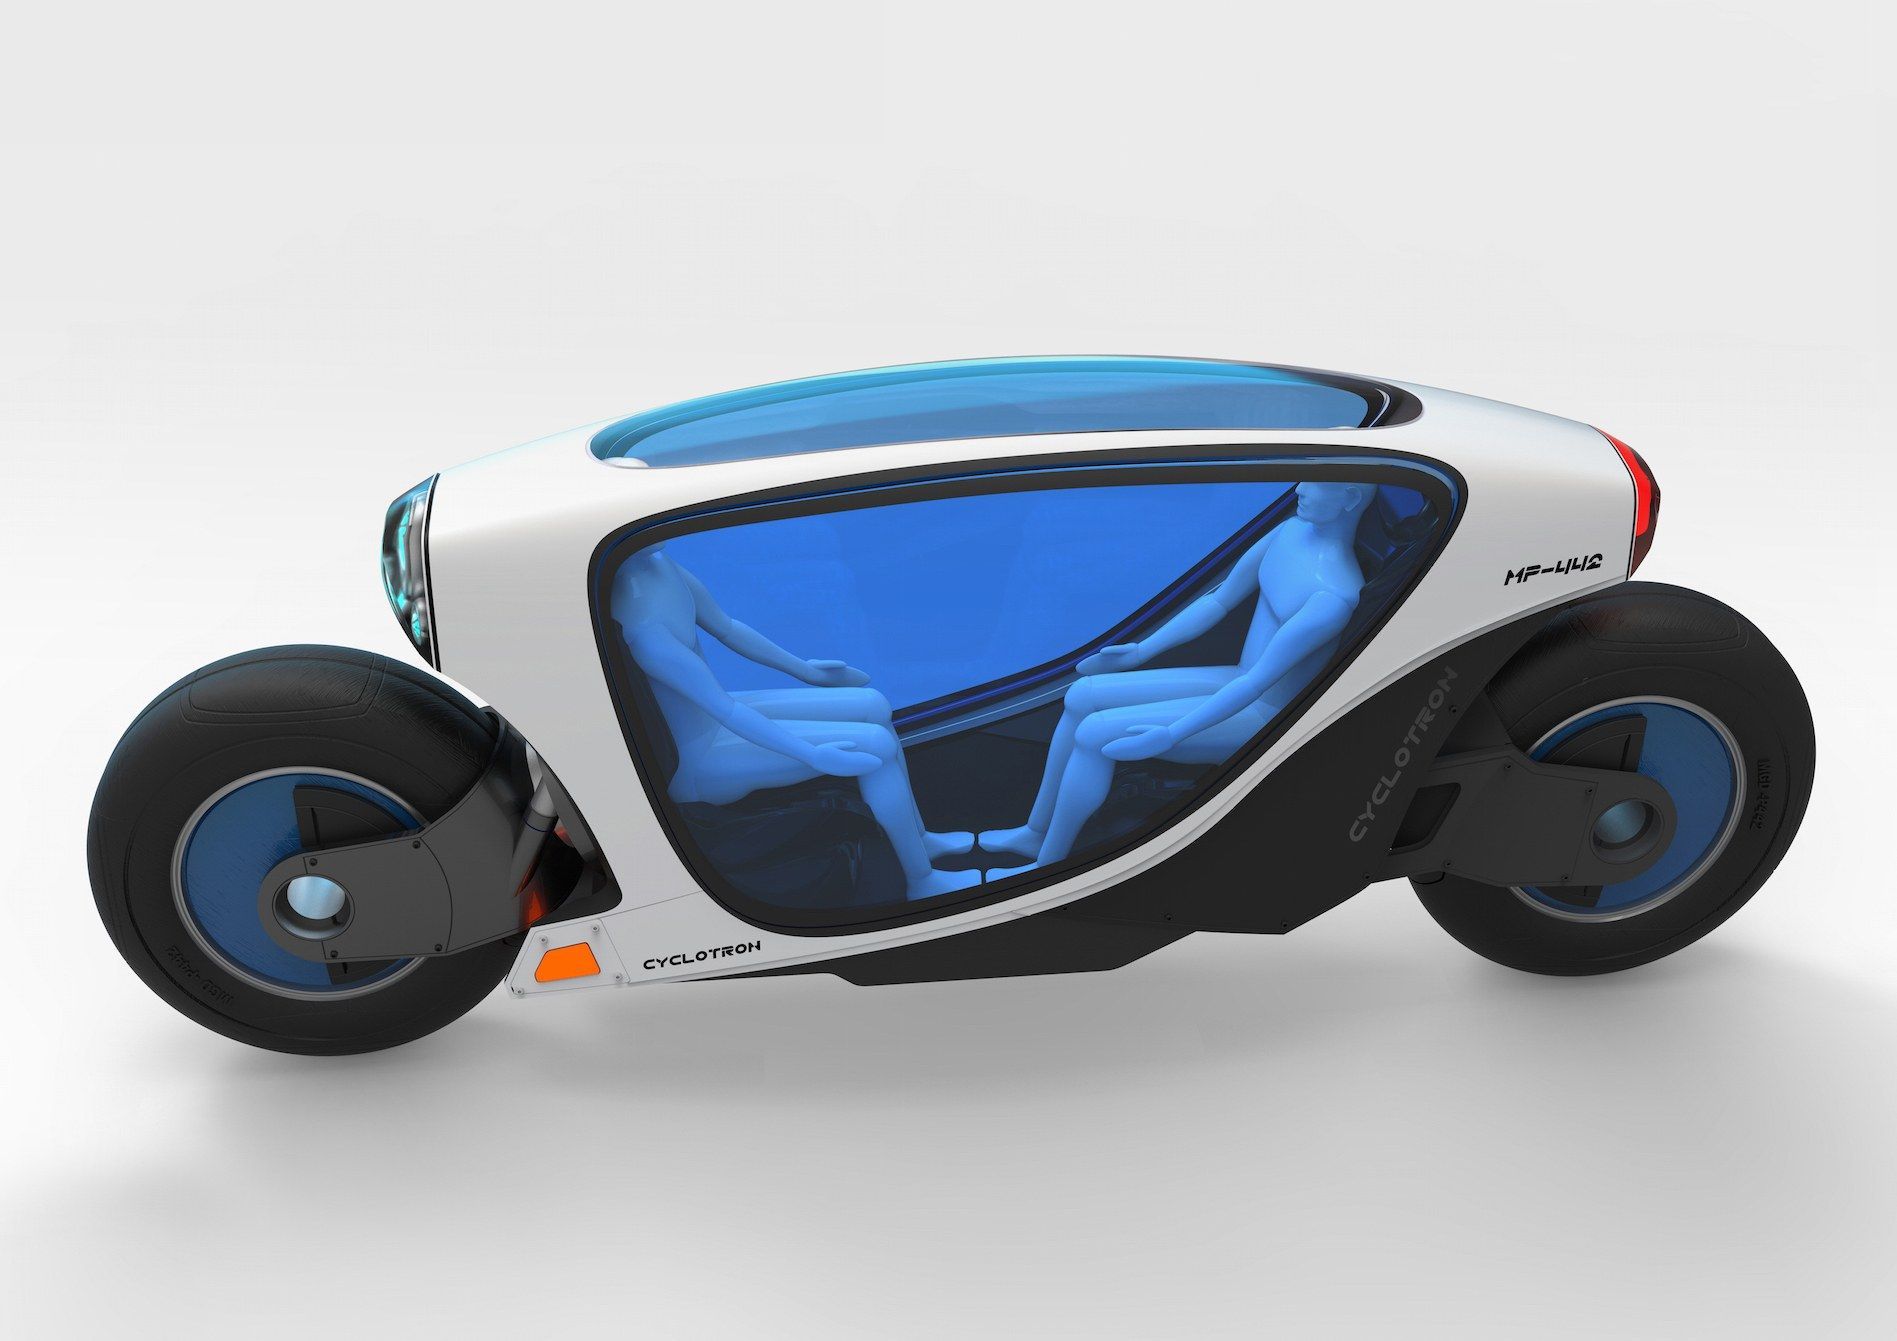 Self Driving Motorcycles - It's just a car with two wheels